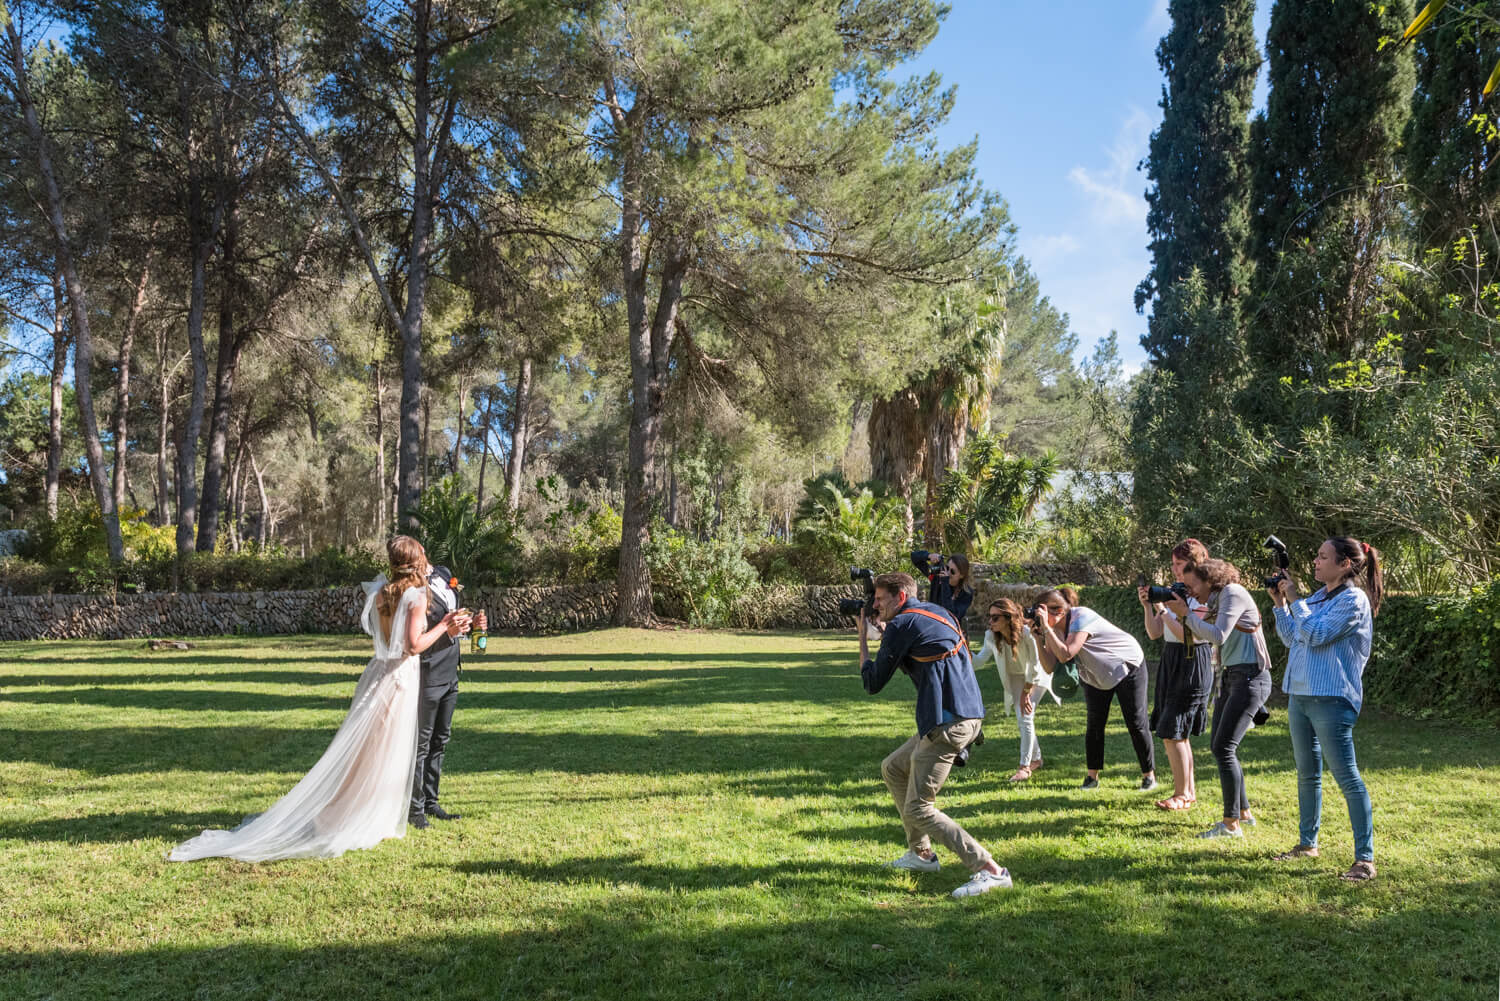 Attendees on wedding photography workshop in Ibiza